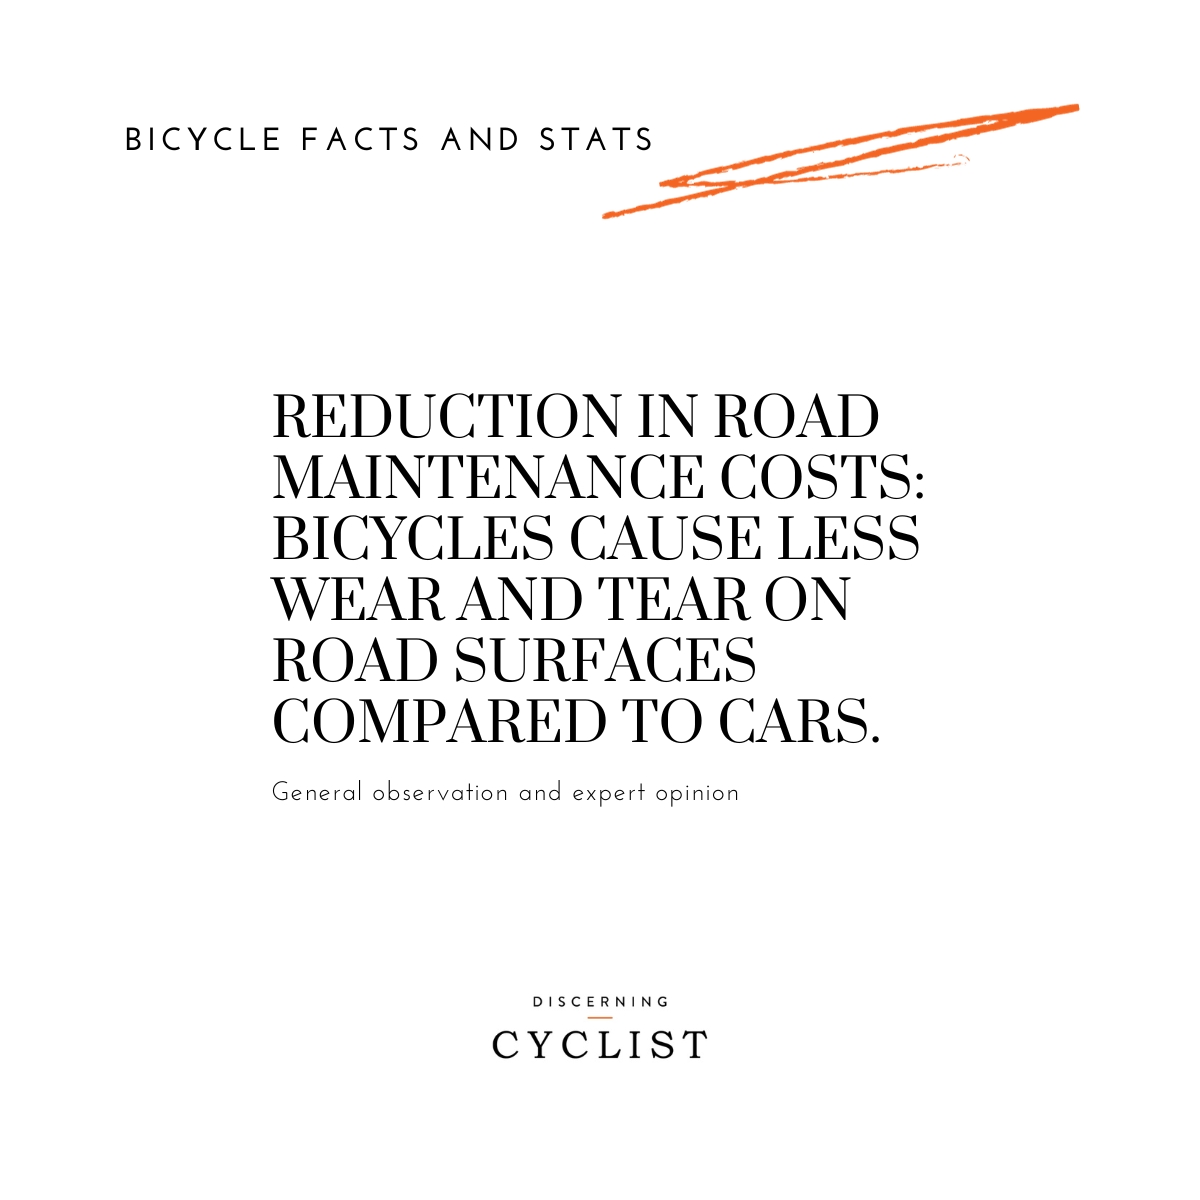 Reduction in Road Maintenance Costs: Bicycles cause less wear and tear on road surfaces compared to cars.